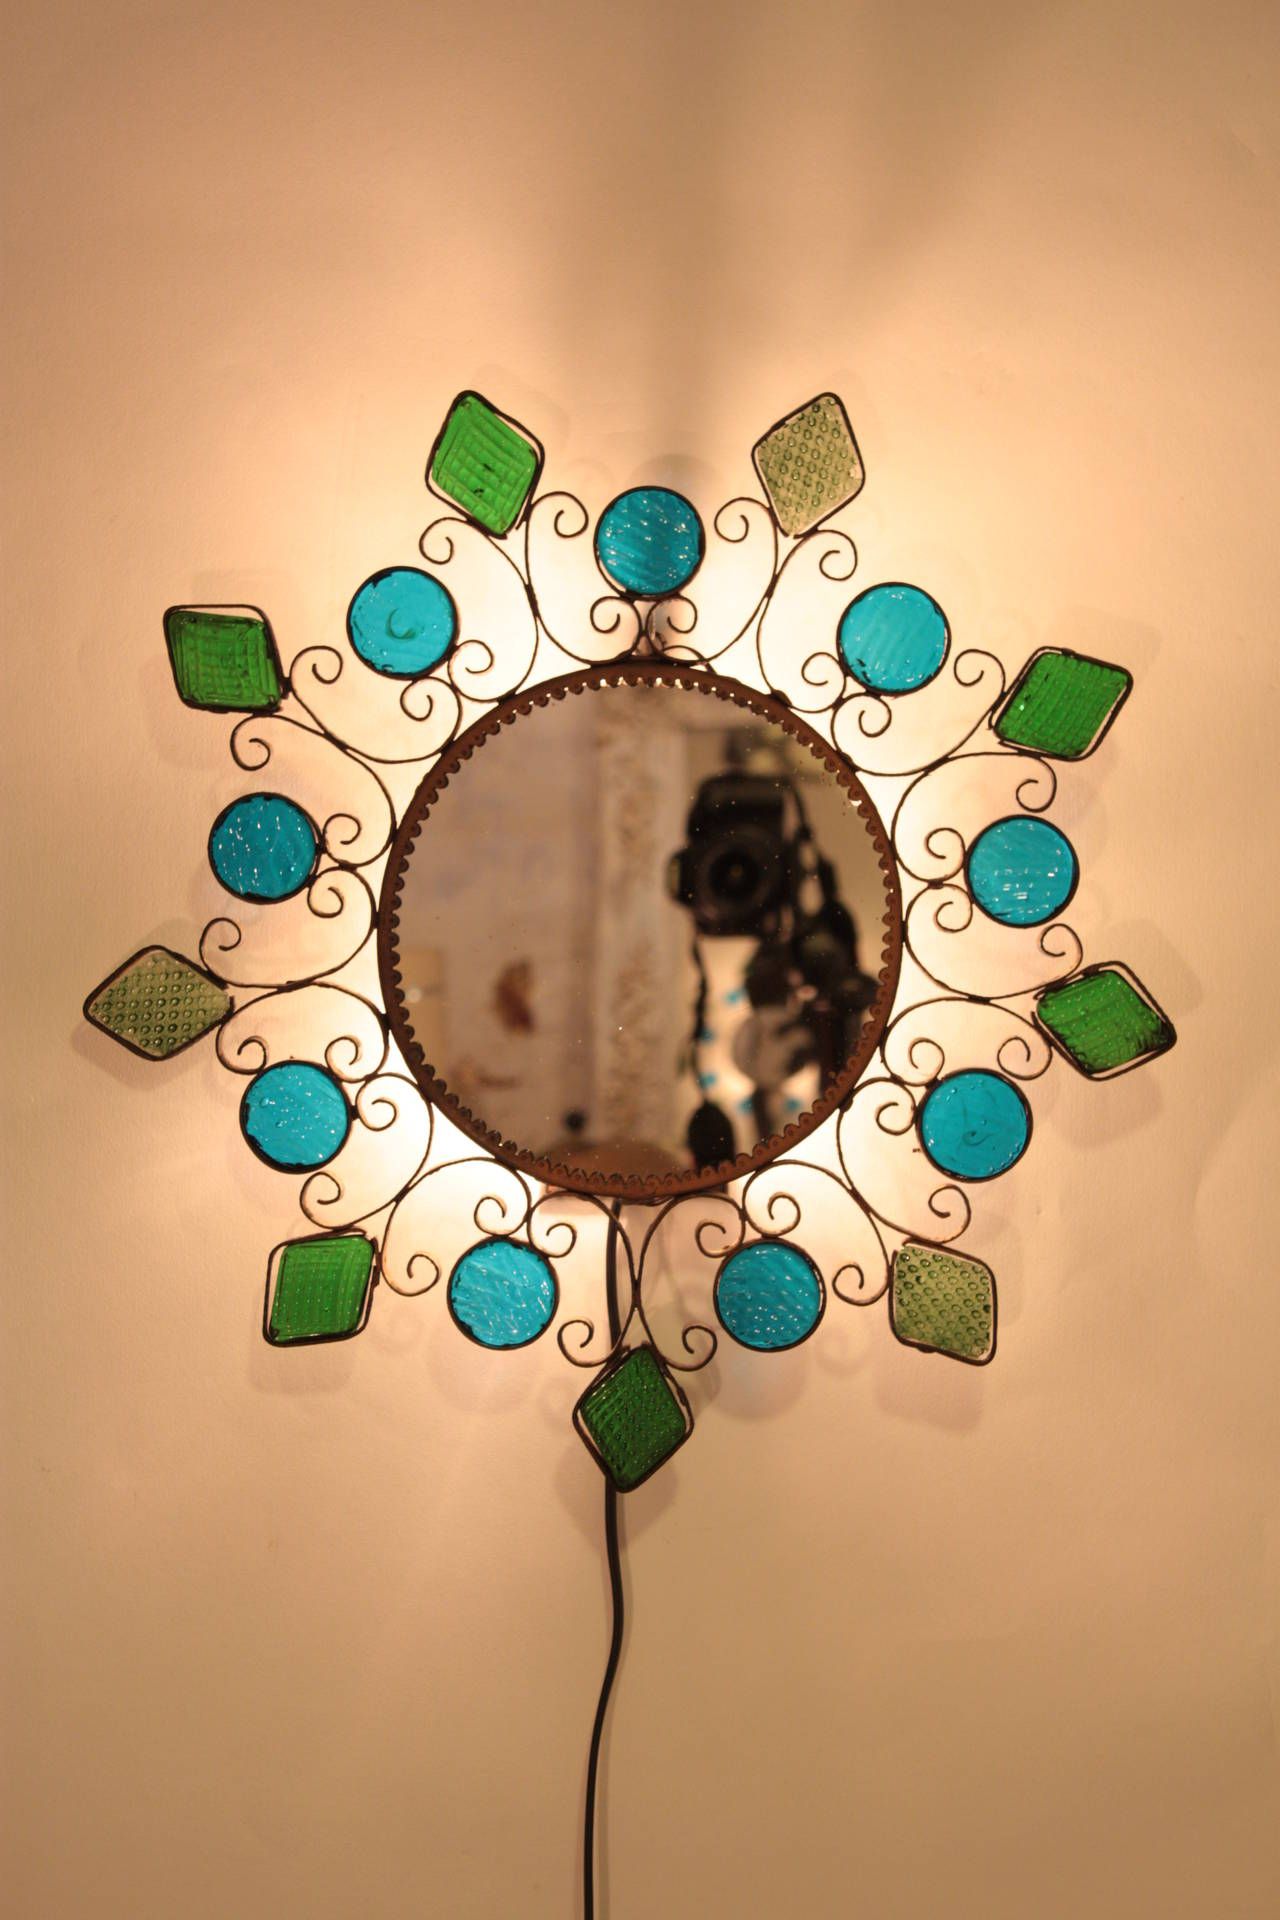 Spanish Blue And Green Glasses Iron Mirror Wall Sconce For Sale At 1stdibs Intended For Blue Green Wall Mirrors (View 3 of 15)